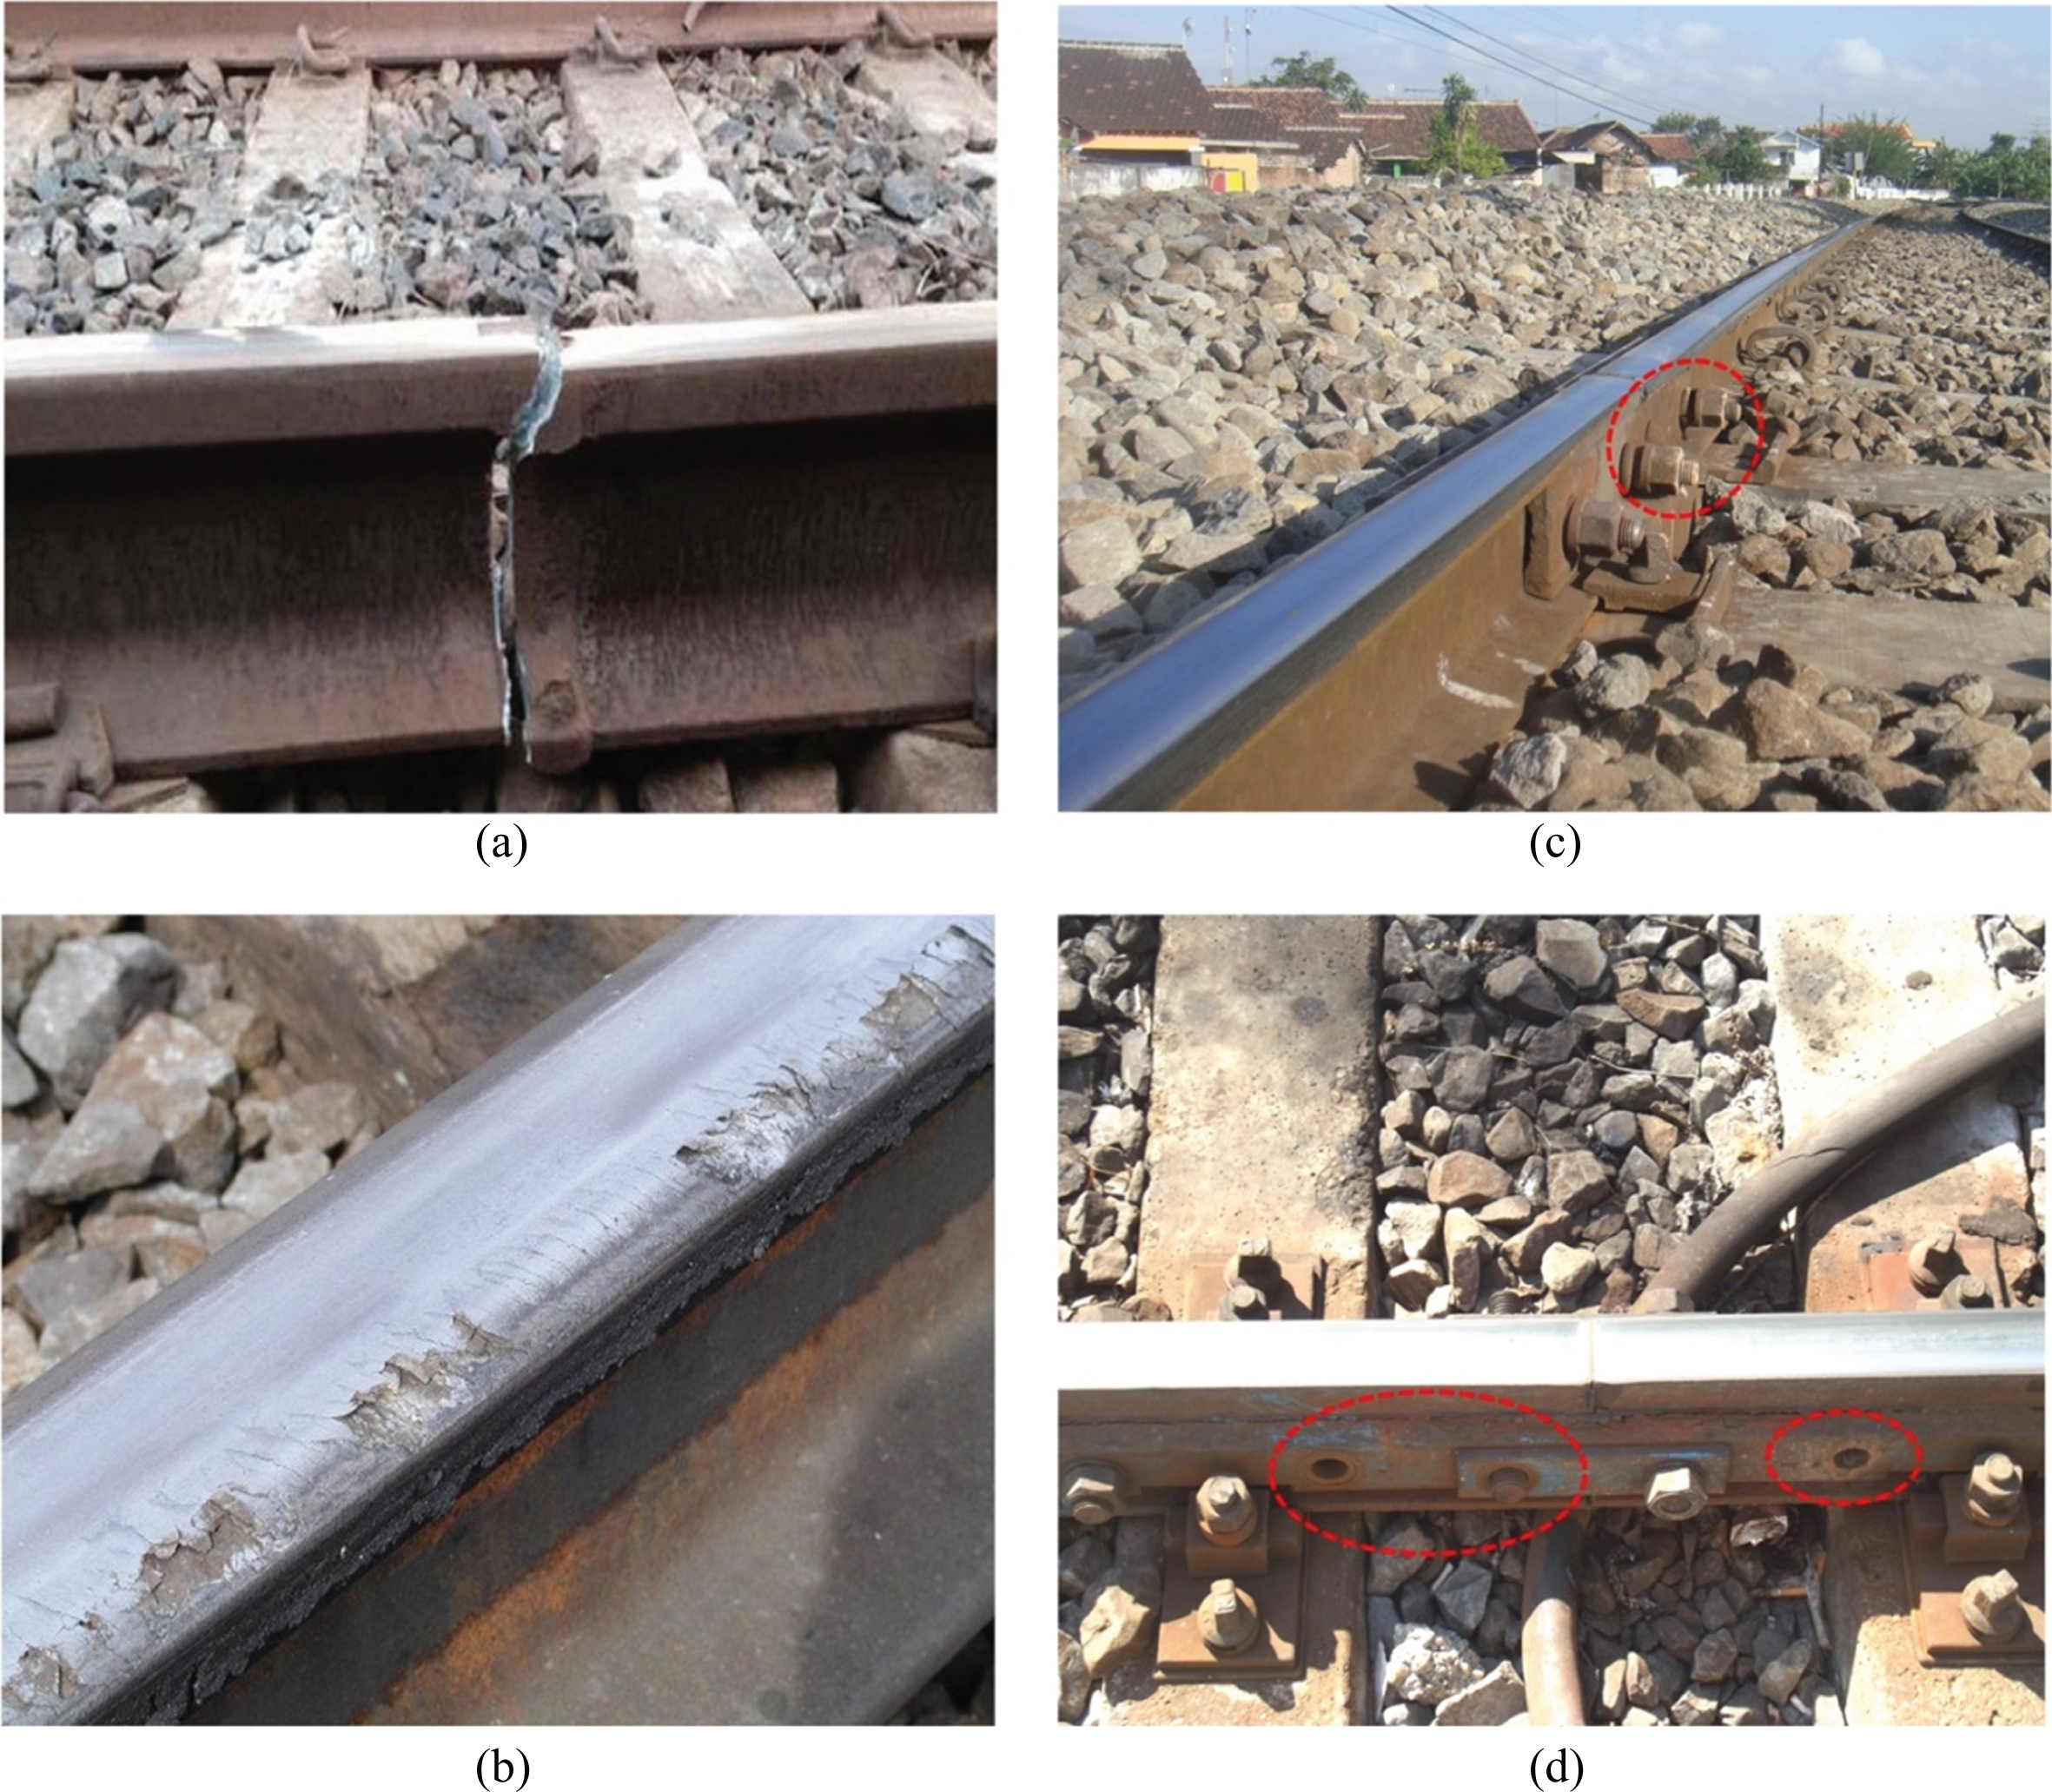 Examples of track abnormalities (a) deformation with crack, (b) rusty deformation on rail top, (c) loose bolts, and (d) missing bolt.